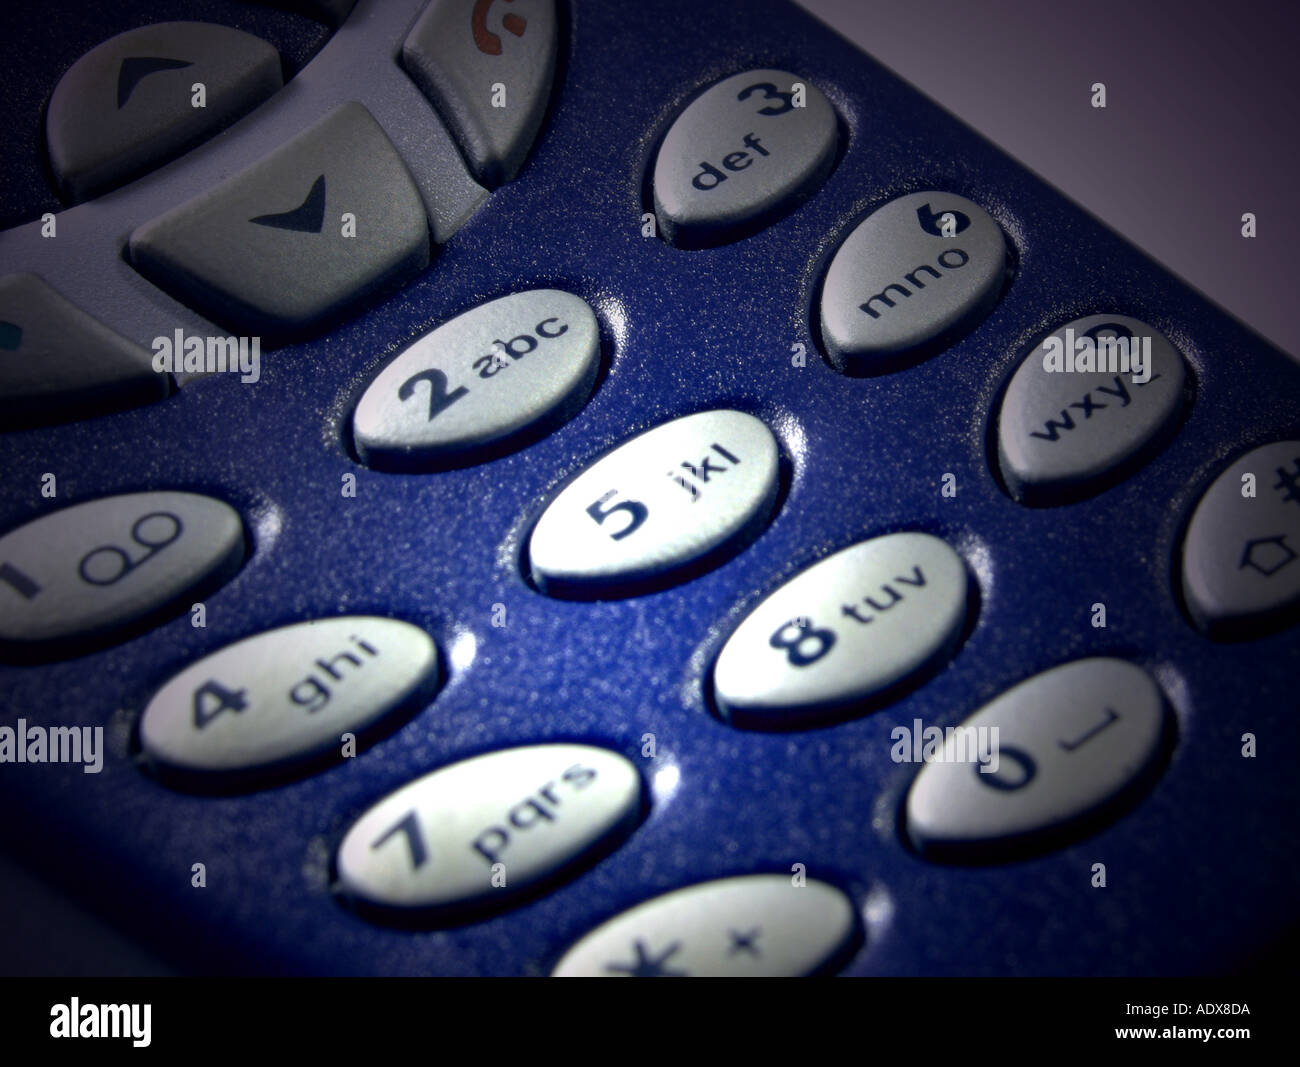 Business Concepts II holding mobile phone cellphone cellular nokia image keypad detail vignette buttons keys technology telephon Stock Photo